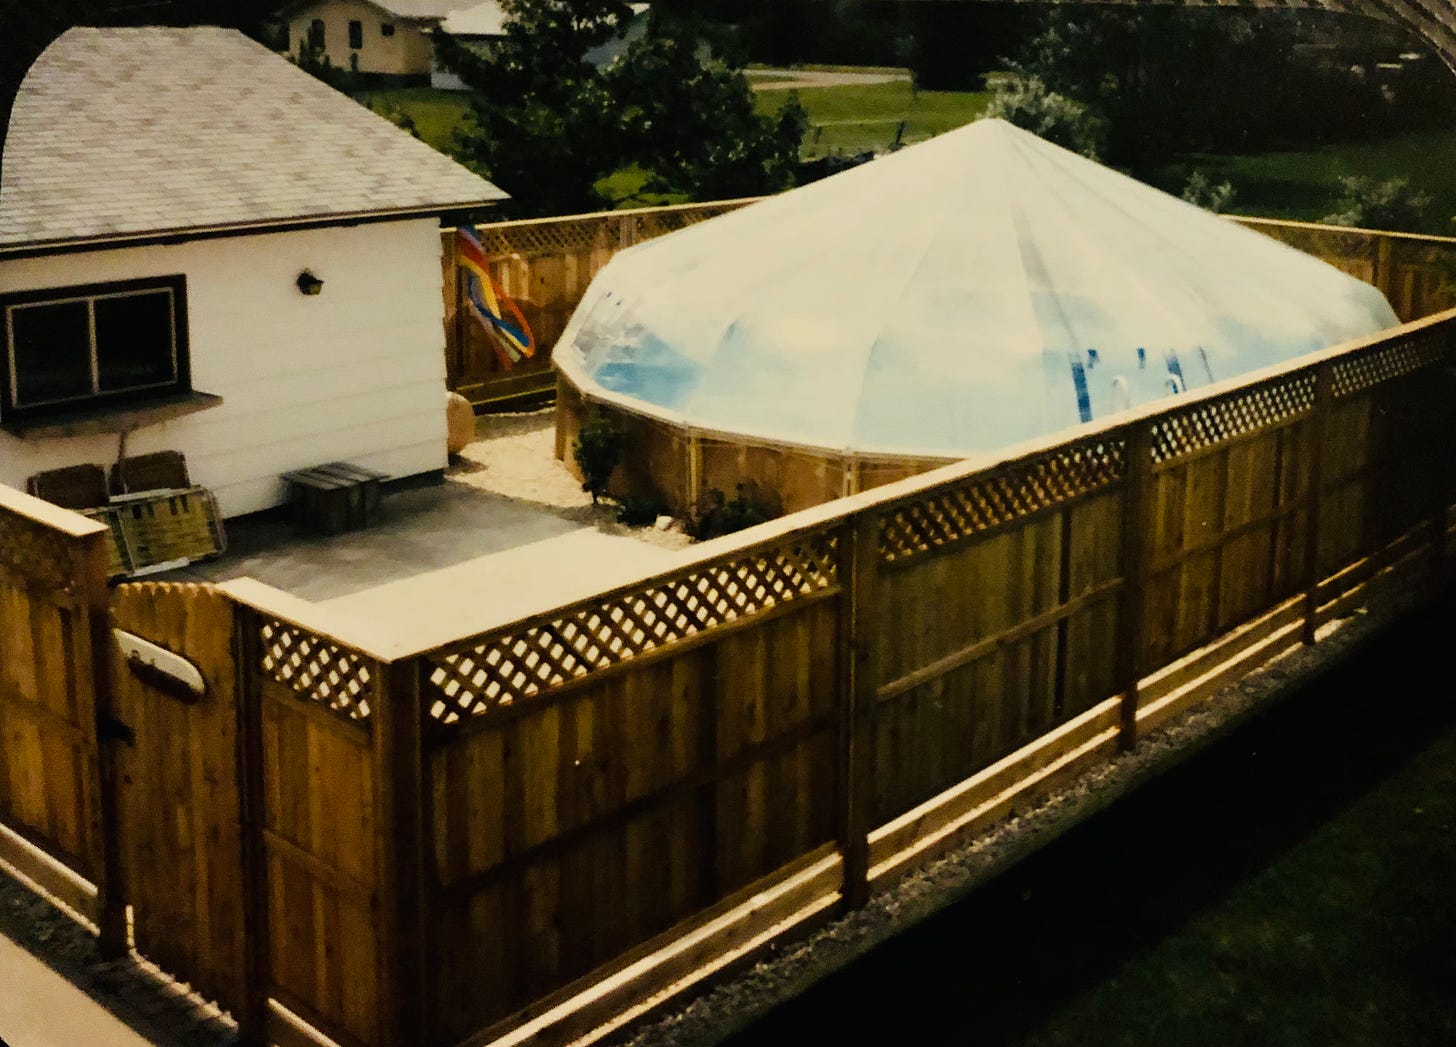 A domed pool sits inside a lovely fence next to the garage. To the right, one small strip of lawn remains.